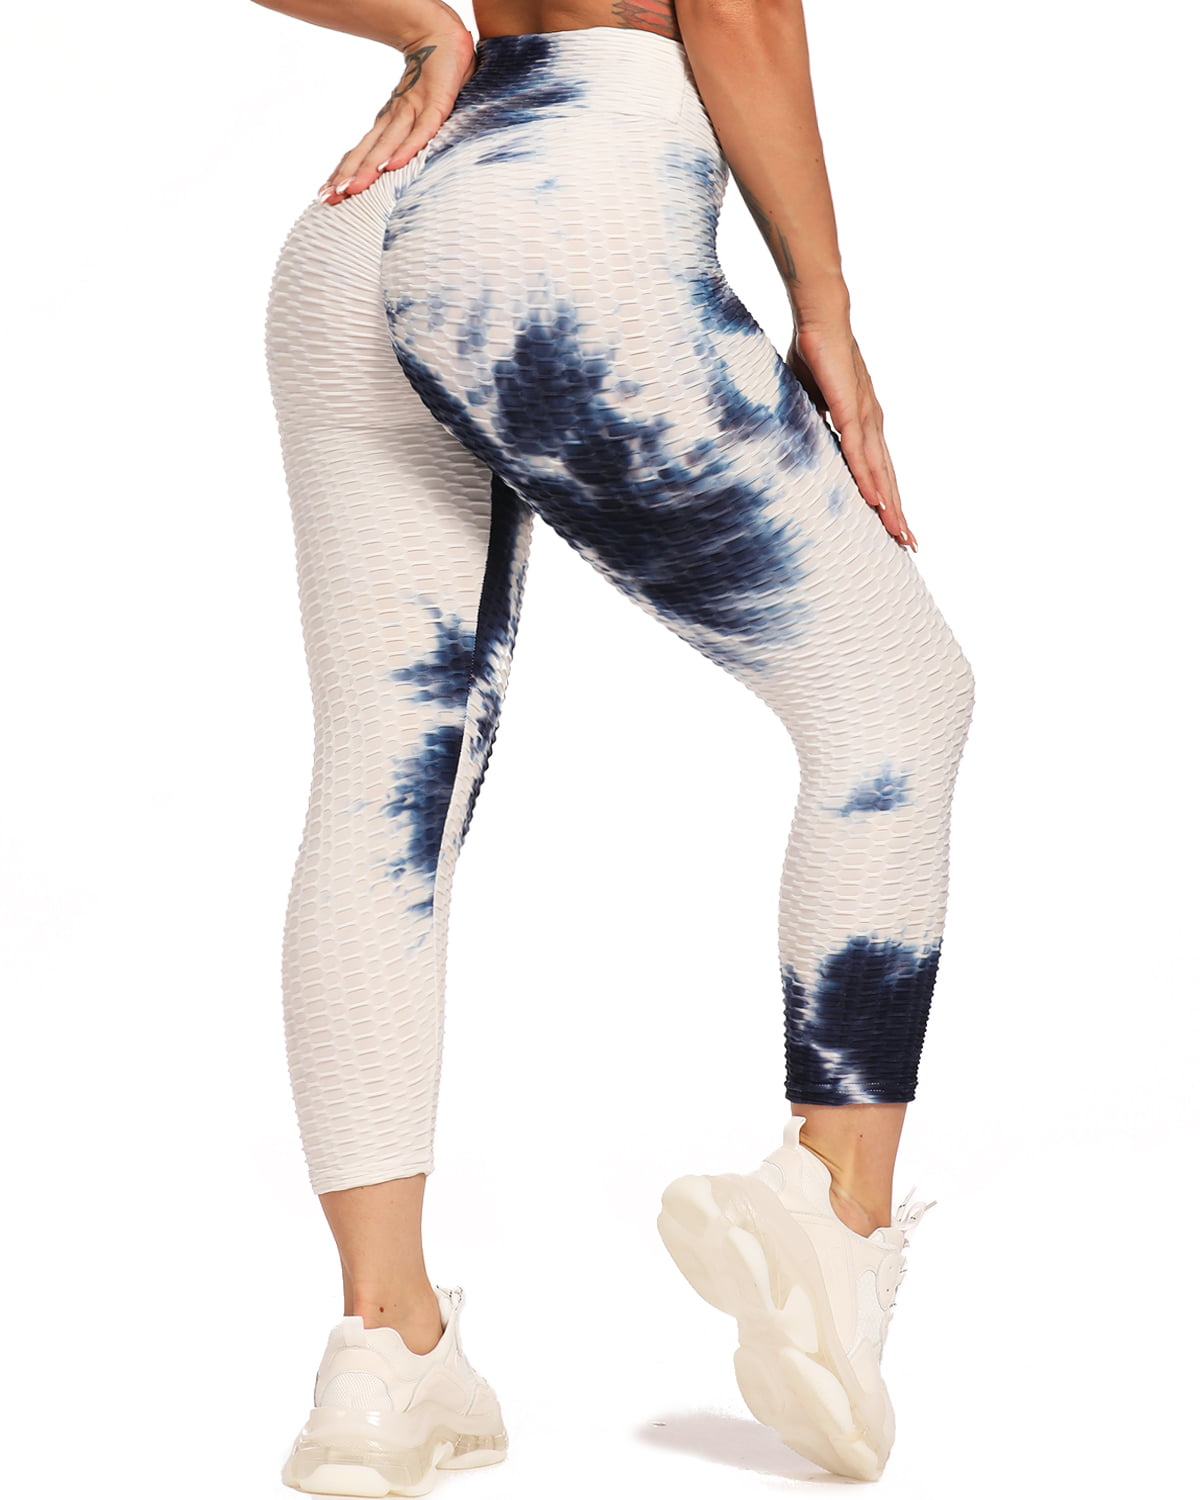 High quality, high discounts Workout Leggings Yoga Pants for Women Tie ...